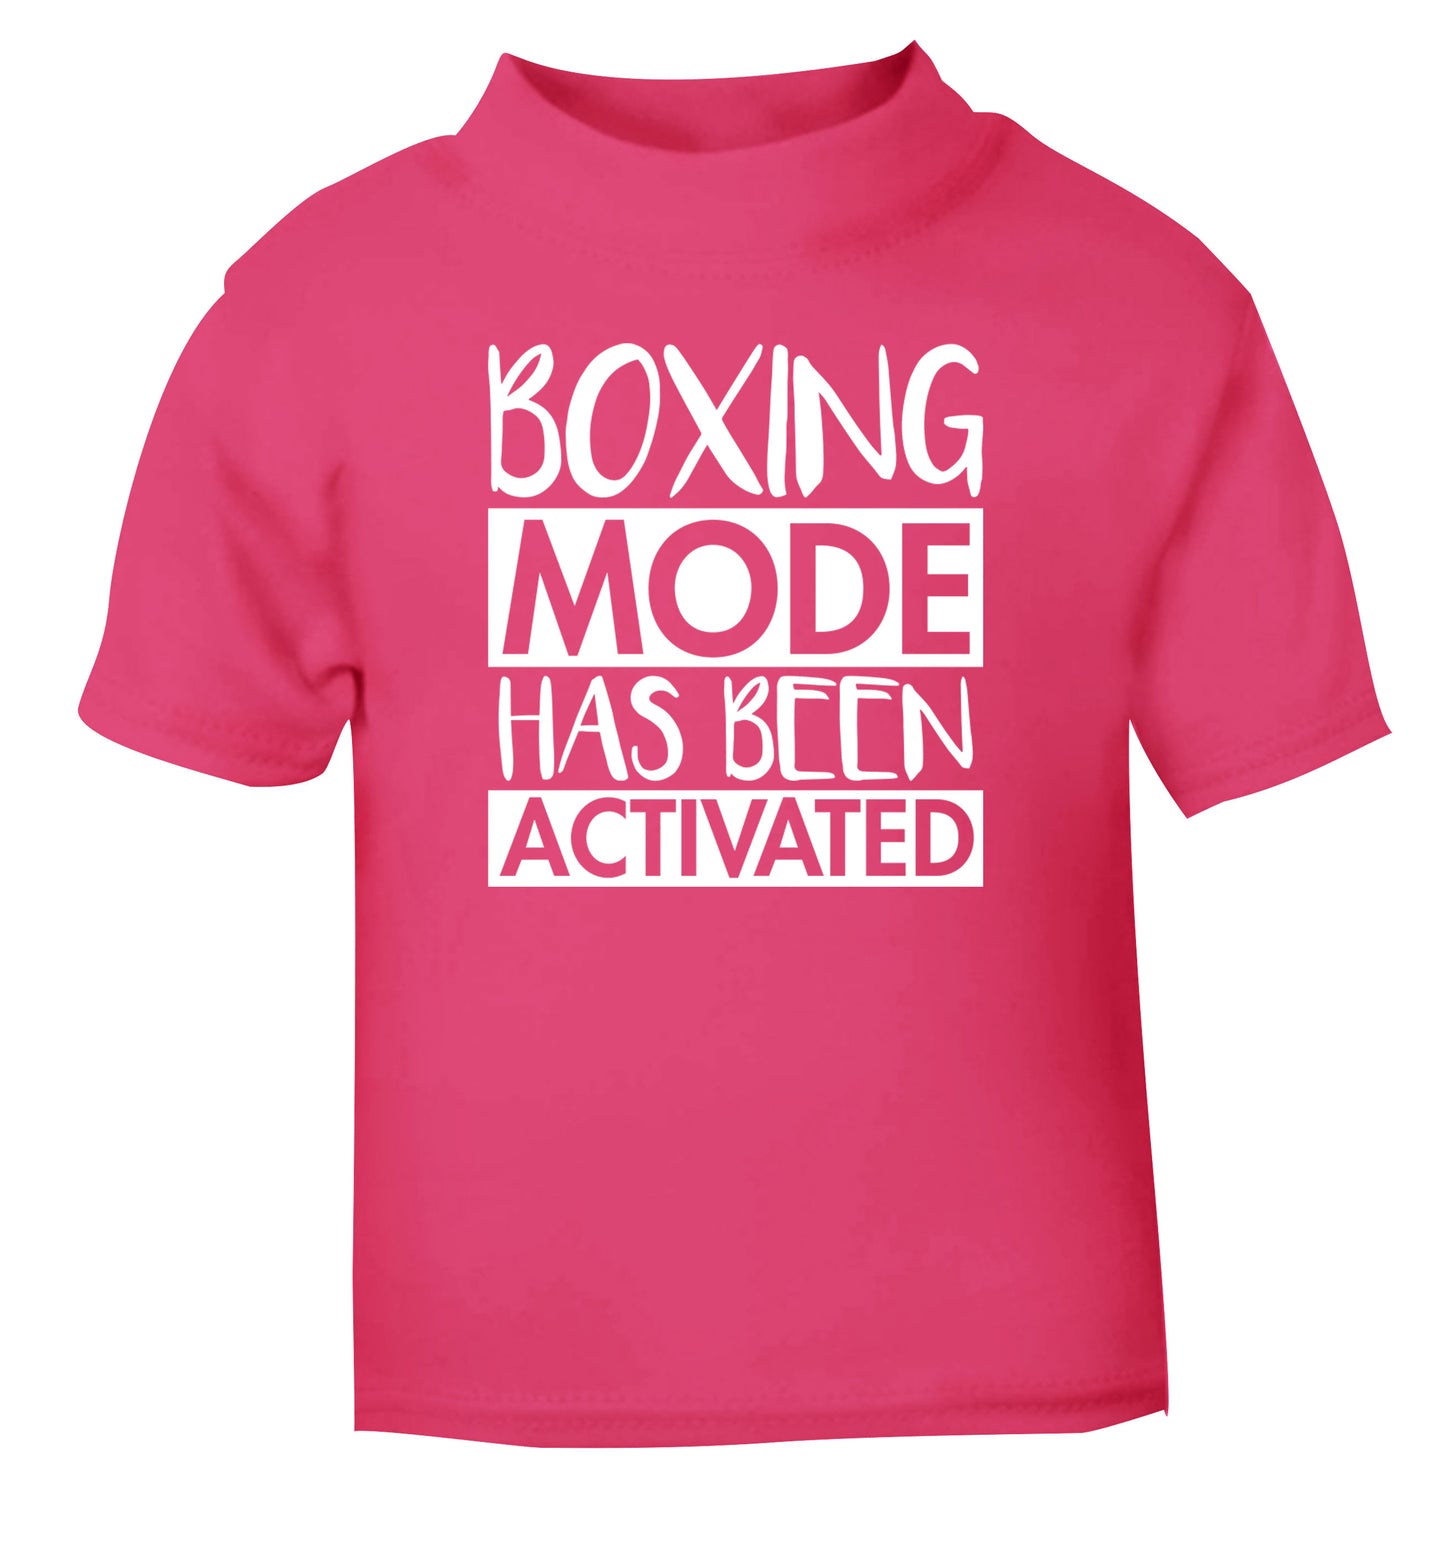 Boxing mode activated pink Baby Toddler Tshirt 2 Years